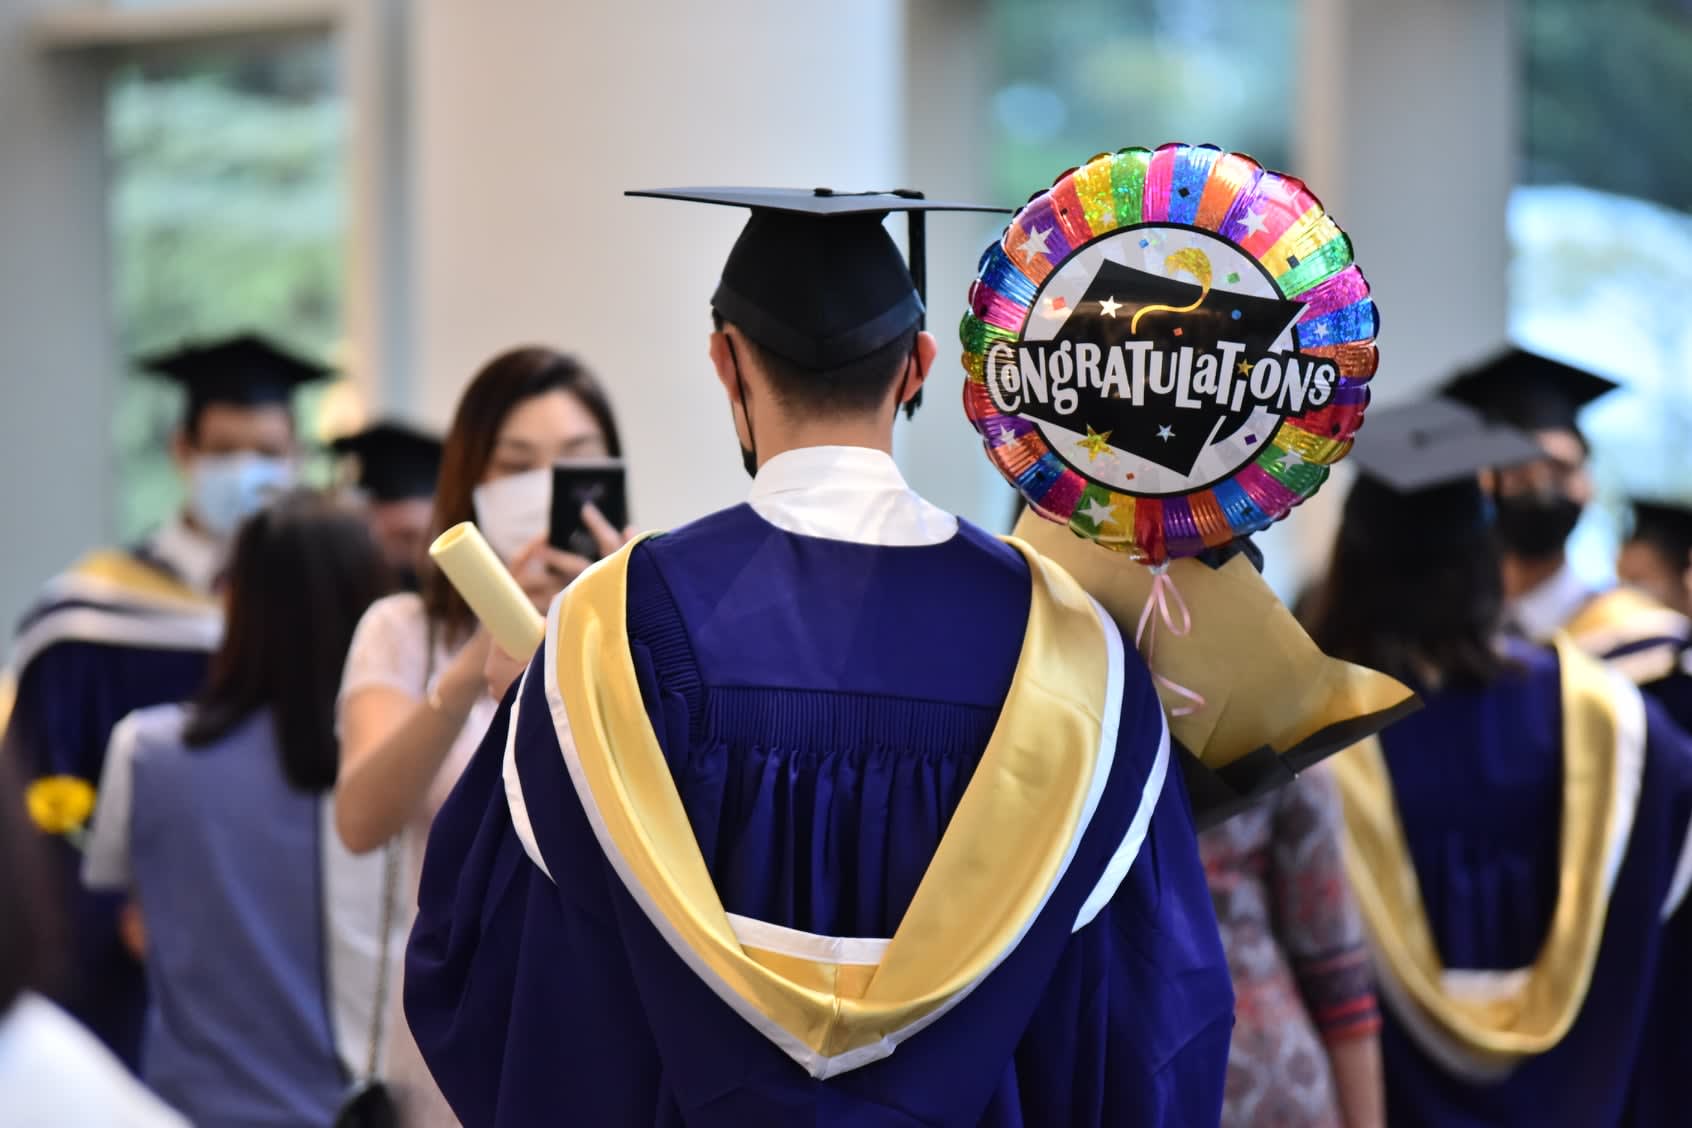 The proportion of graduates in part-time or temporary employment fell to 8.7 per cent, compared to 22.3 per cent in 2020.